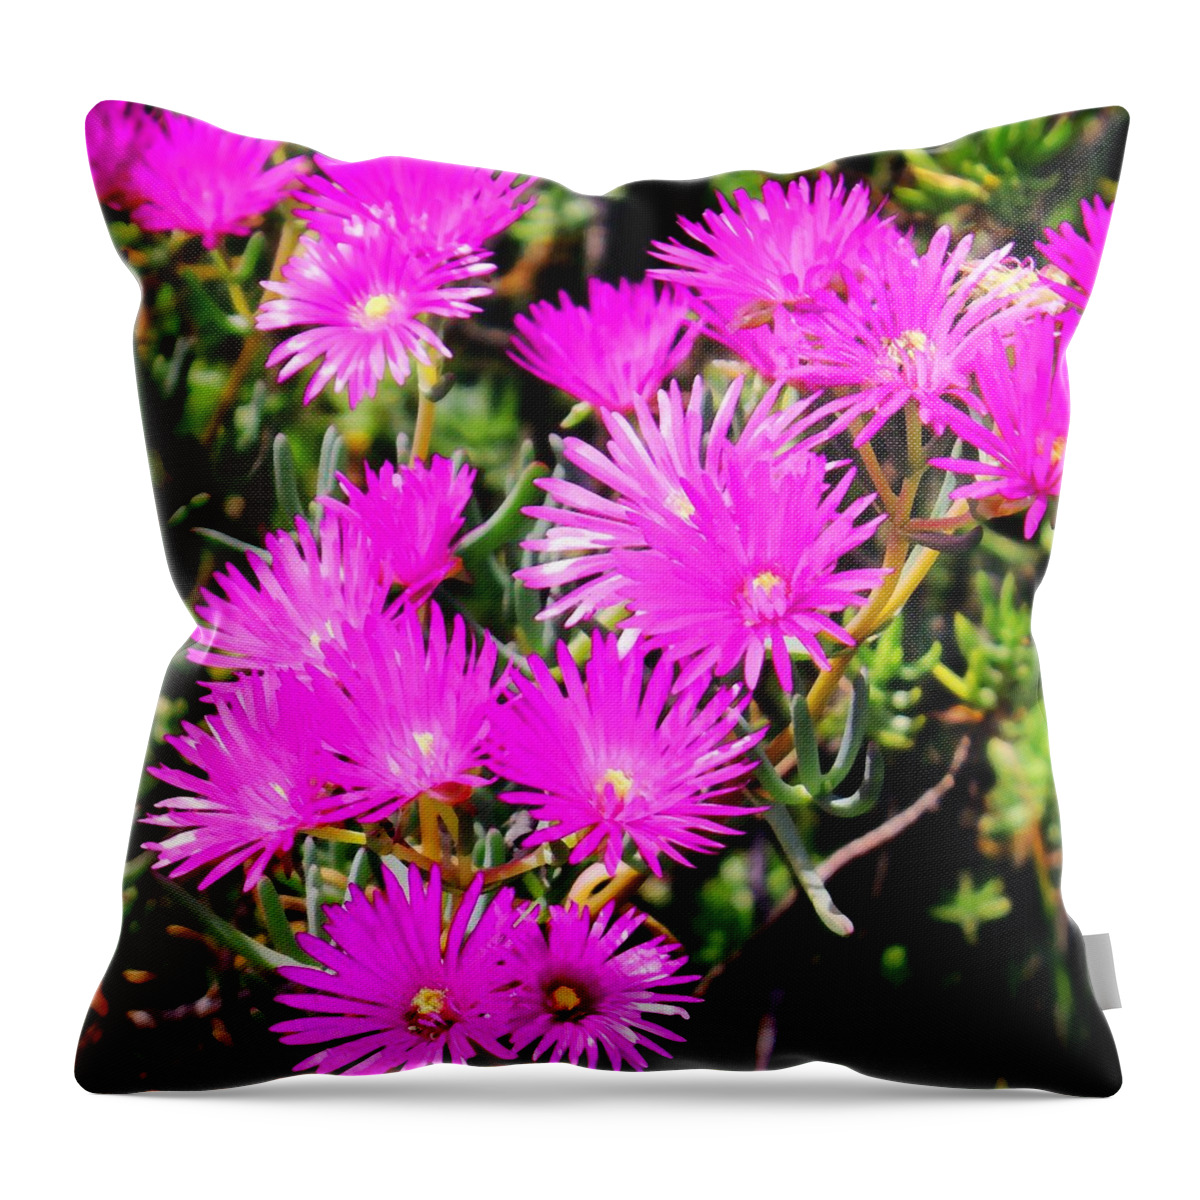 Flowers Throw Pillow featuring the photograph Flowerworks by Timothy Bulone